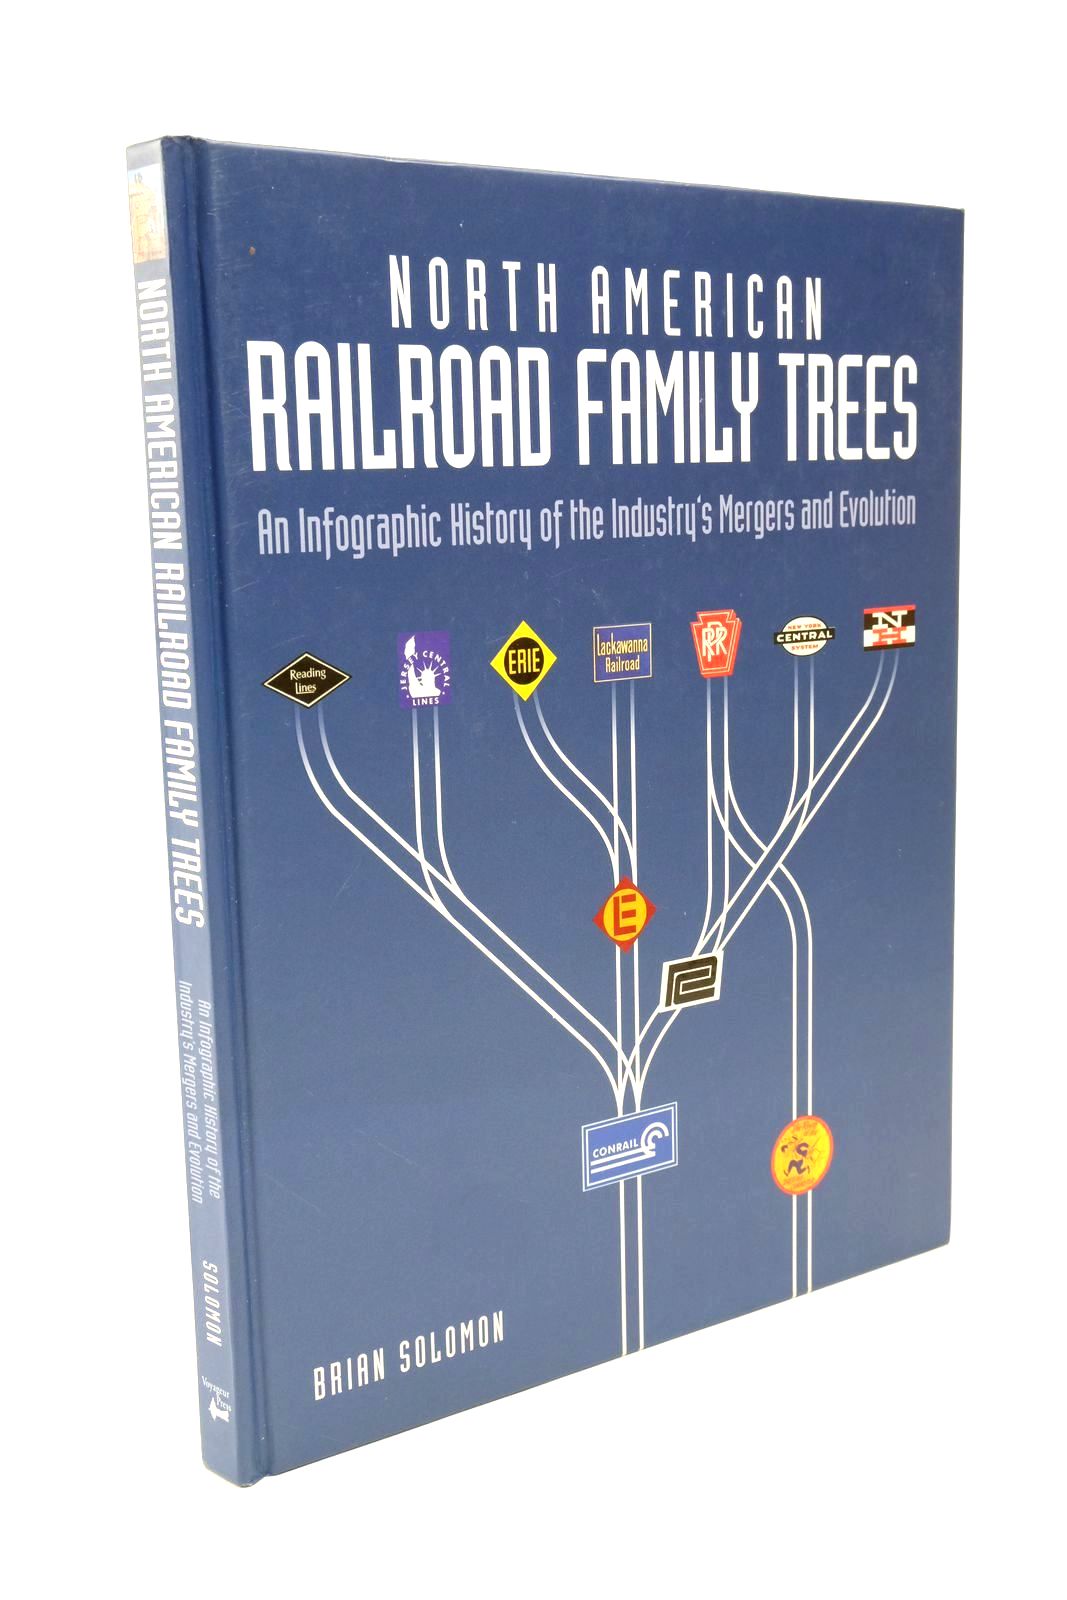 Photo of NORTH AMERICAN RAILROAD FAMILY TREES- Stock Number: 1322618